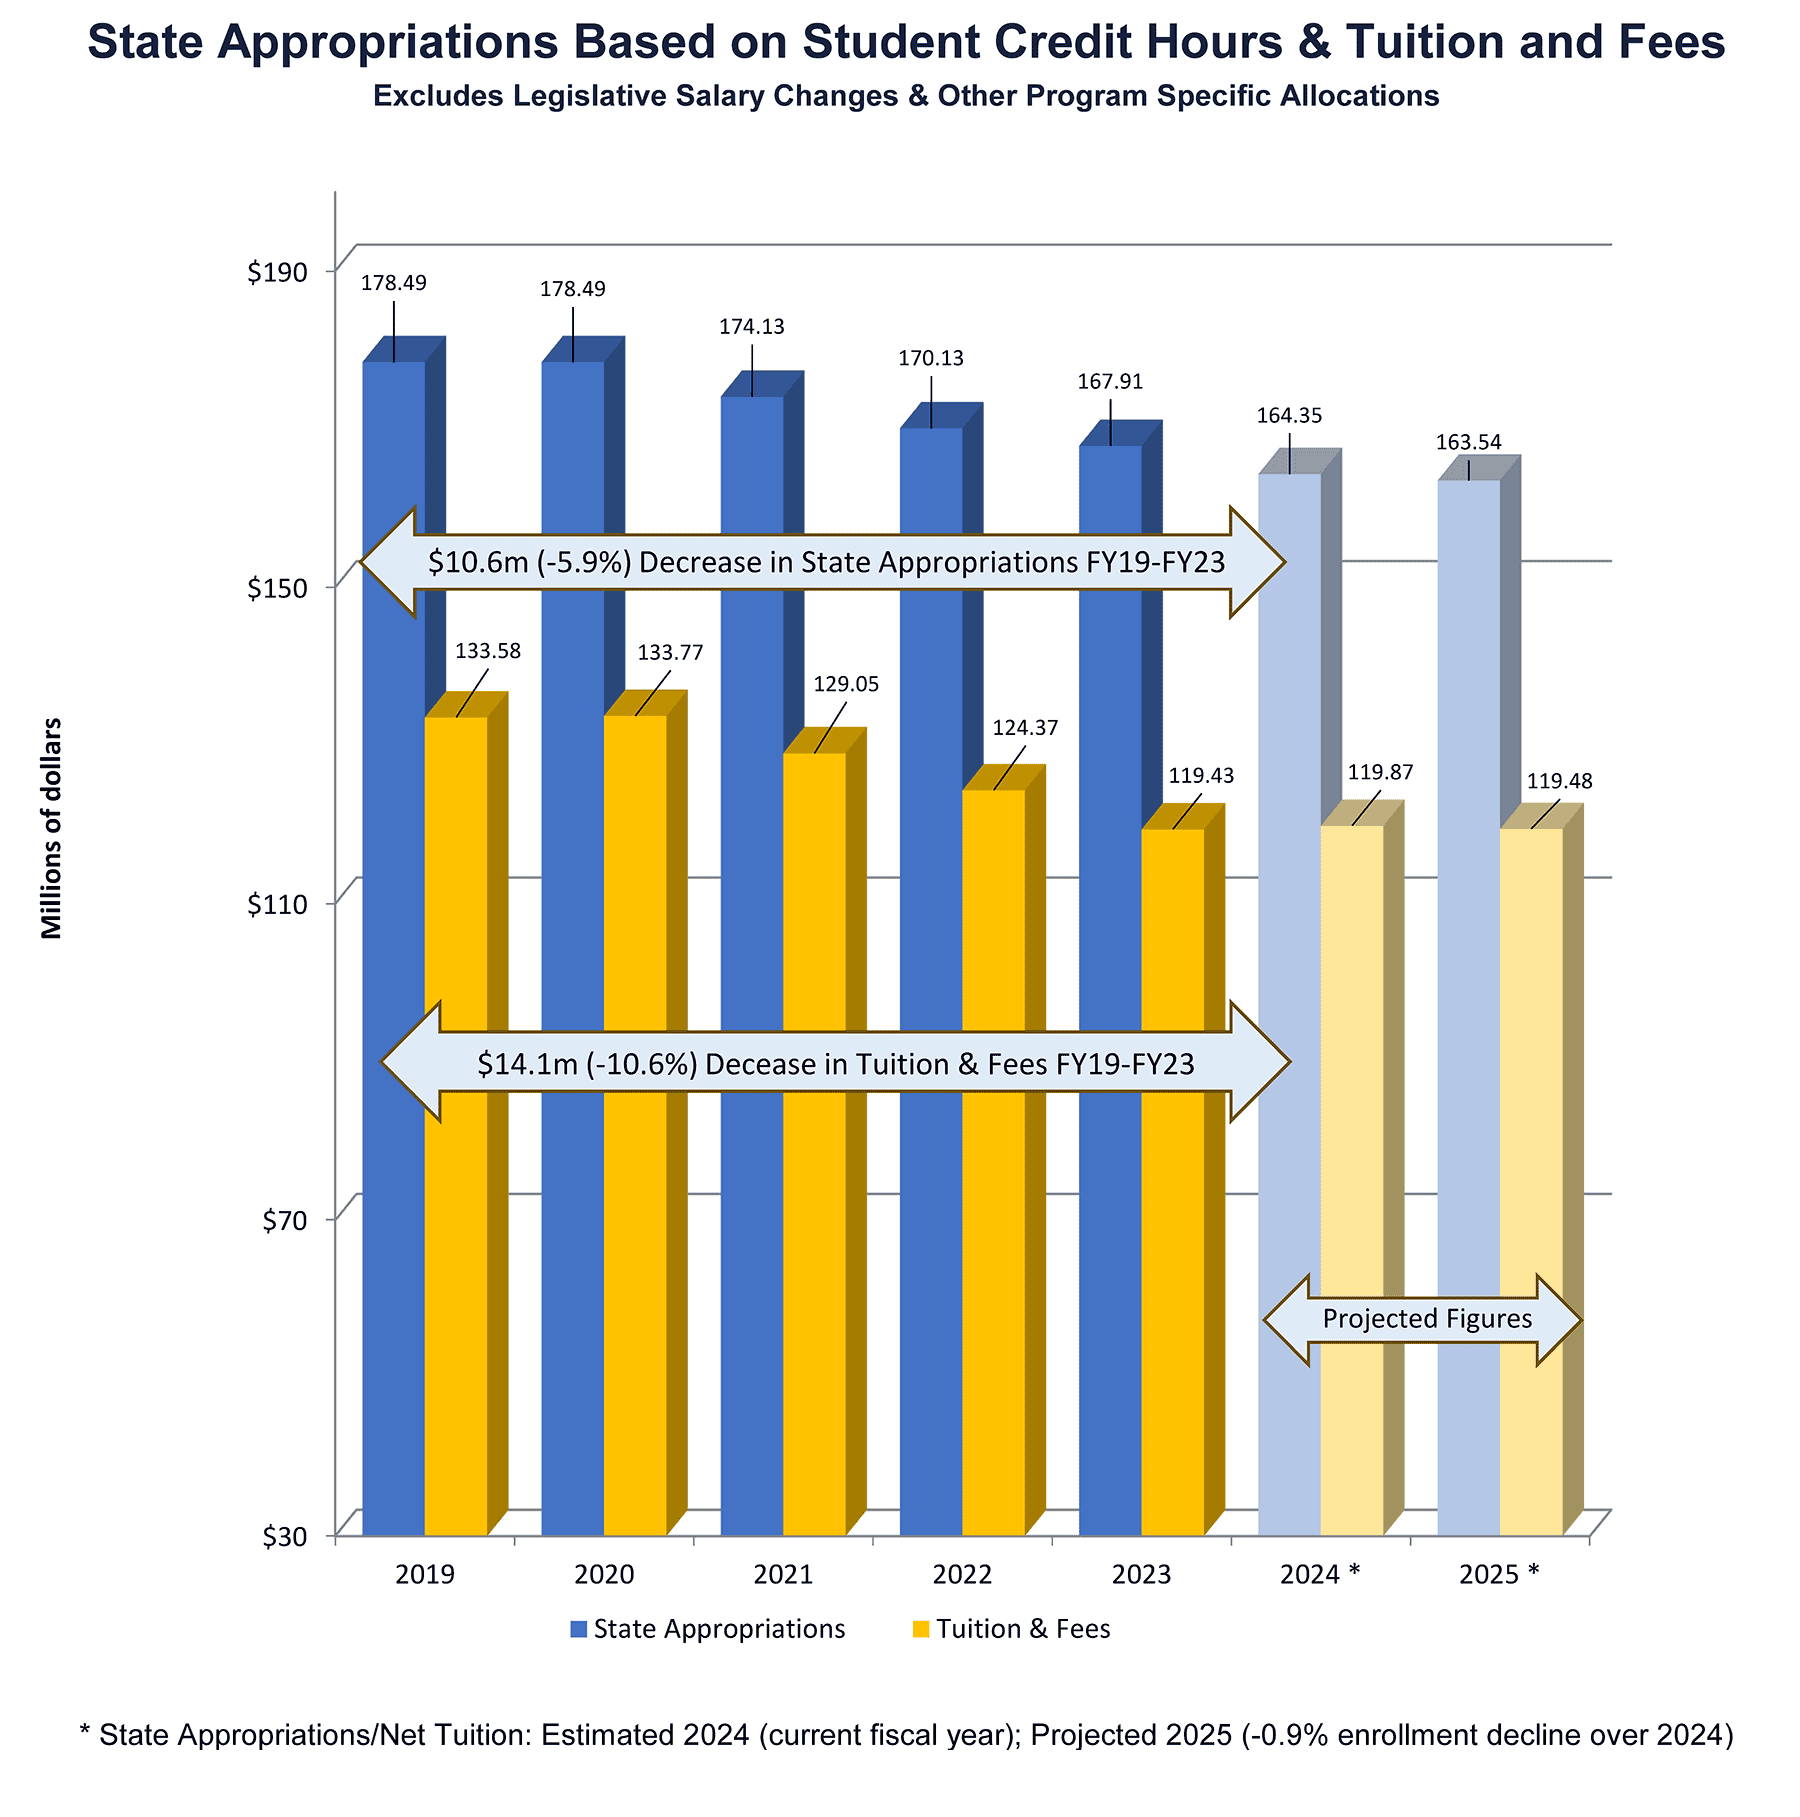 State appropriations based on student credit hours & tuition and fees.